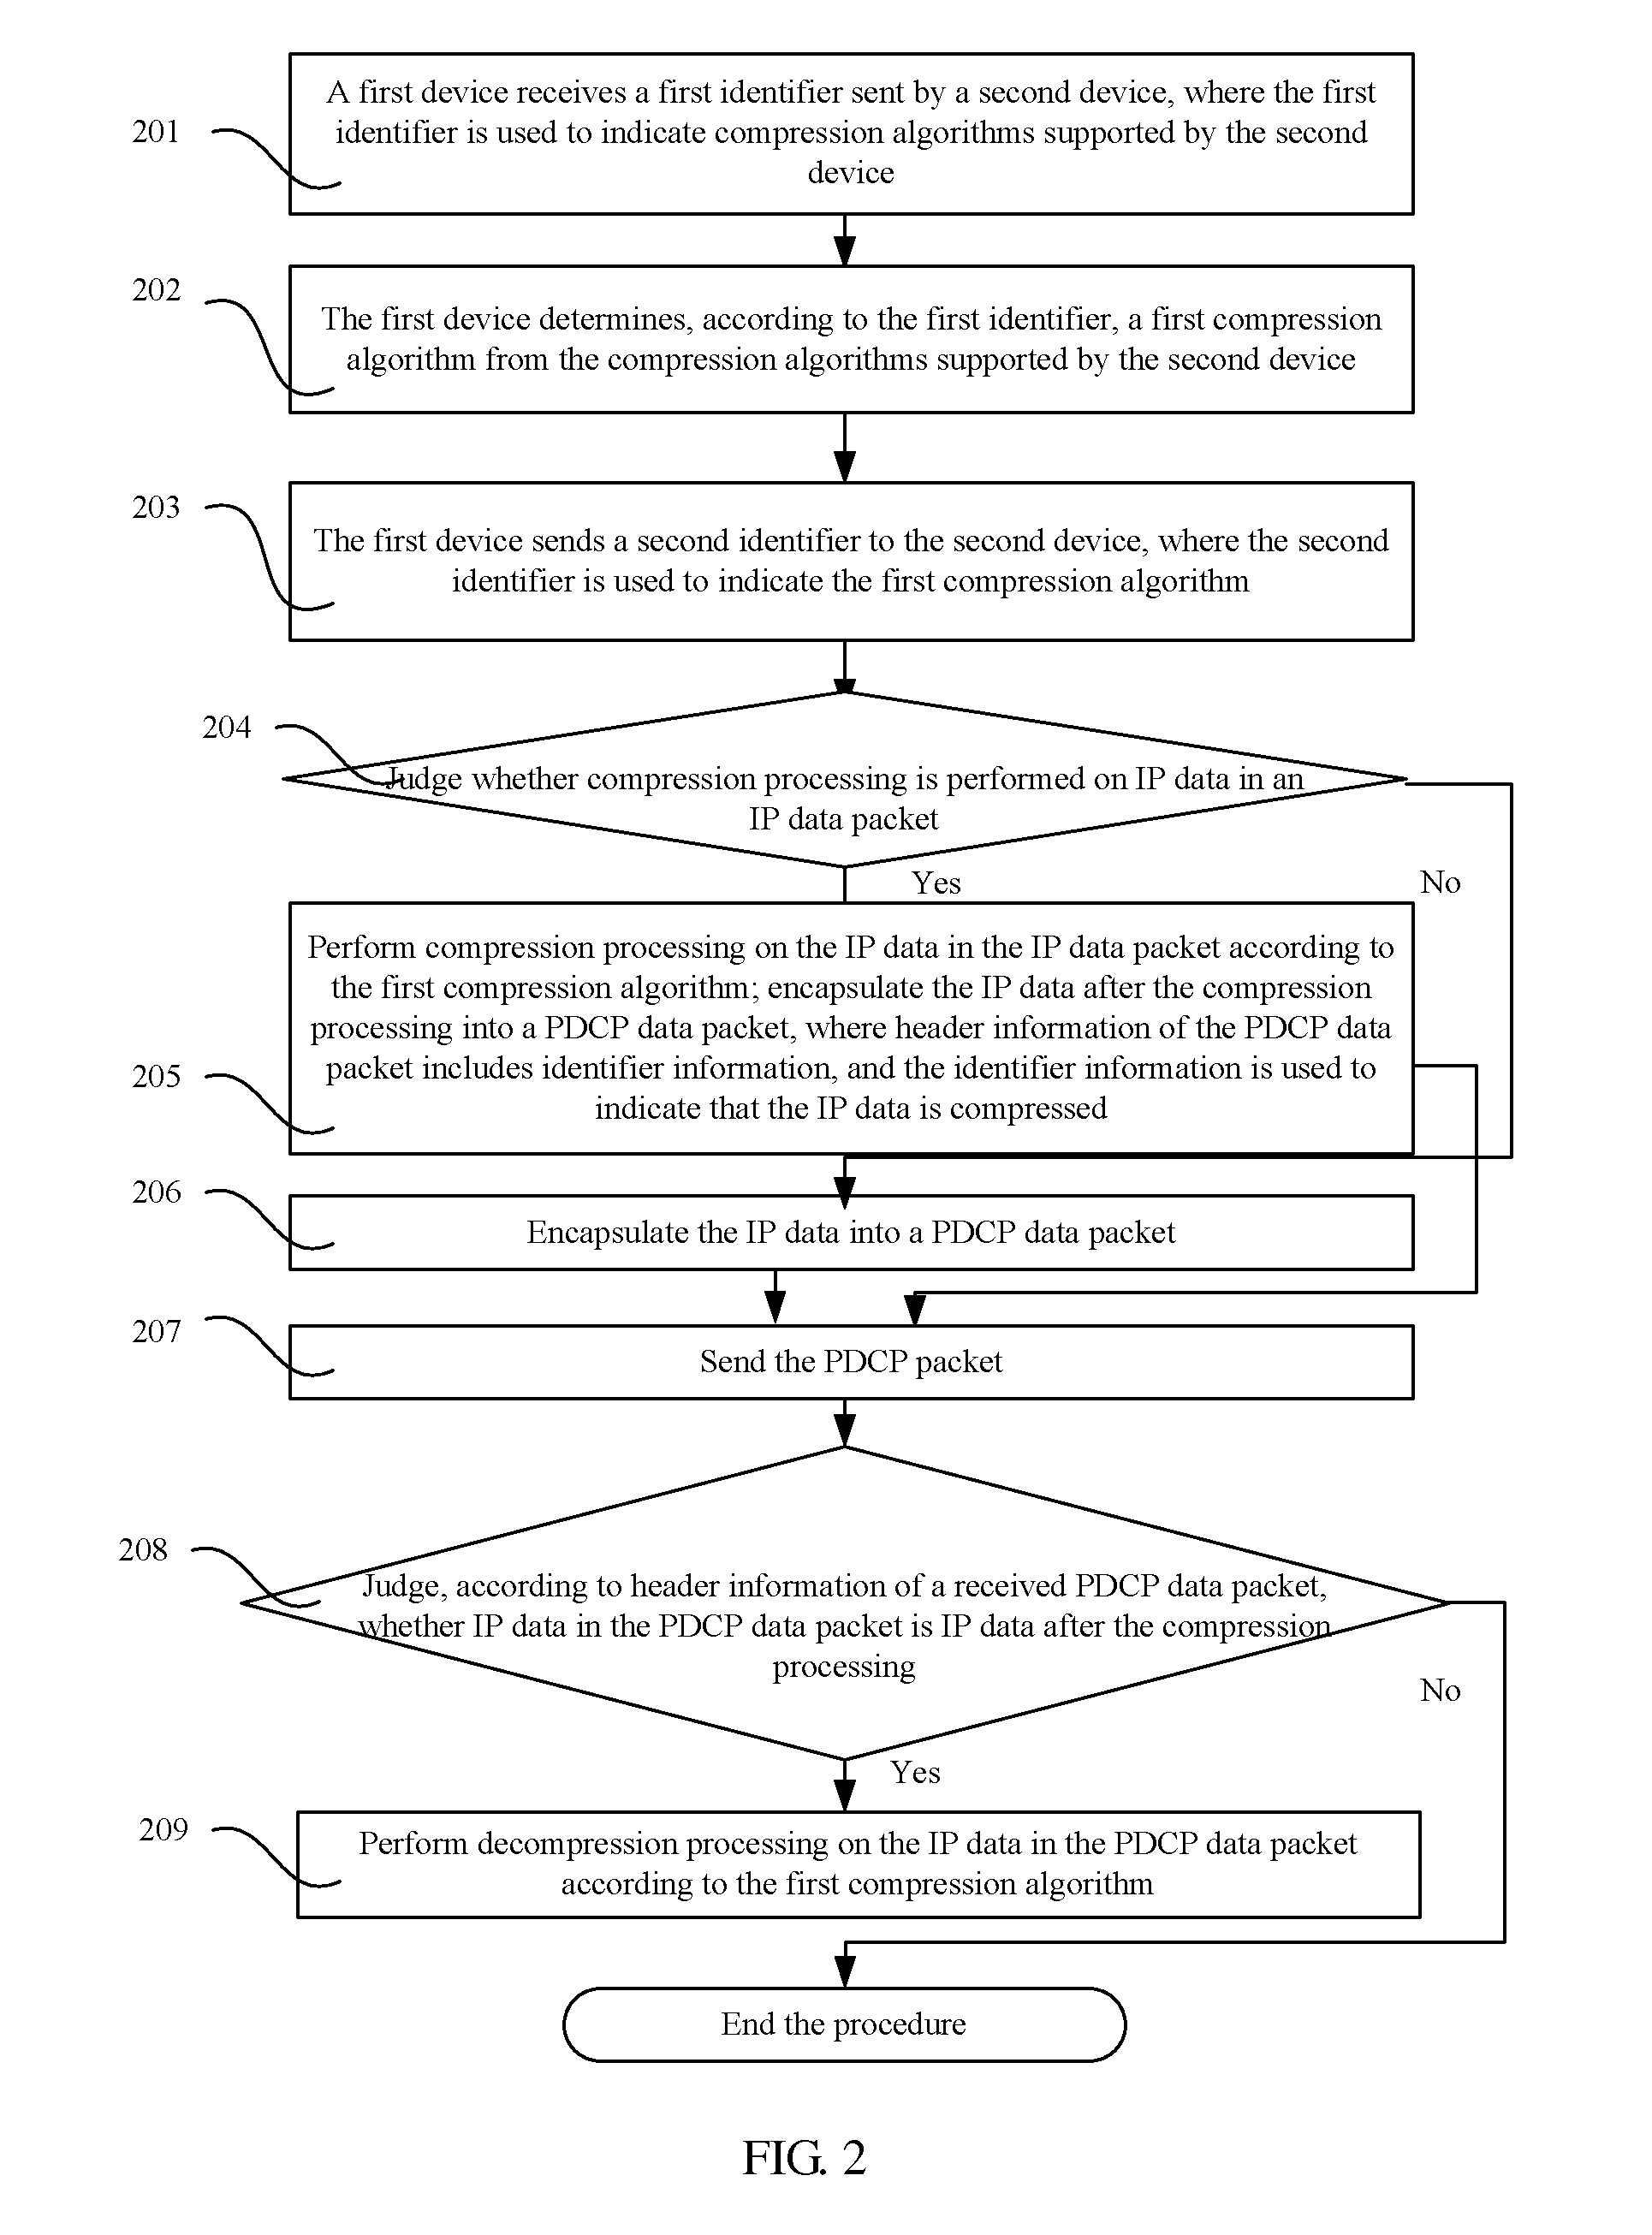 Method and apparatus for compressing and decompressing IP data packet